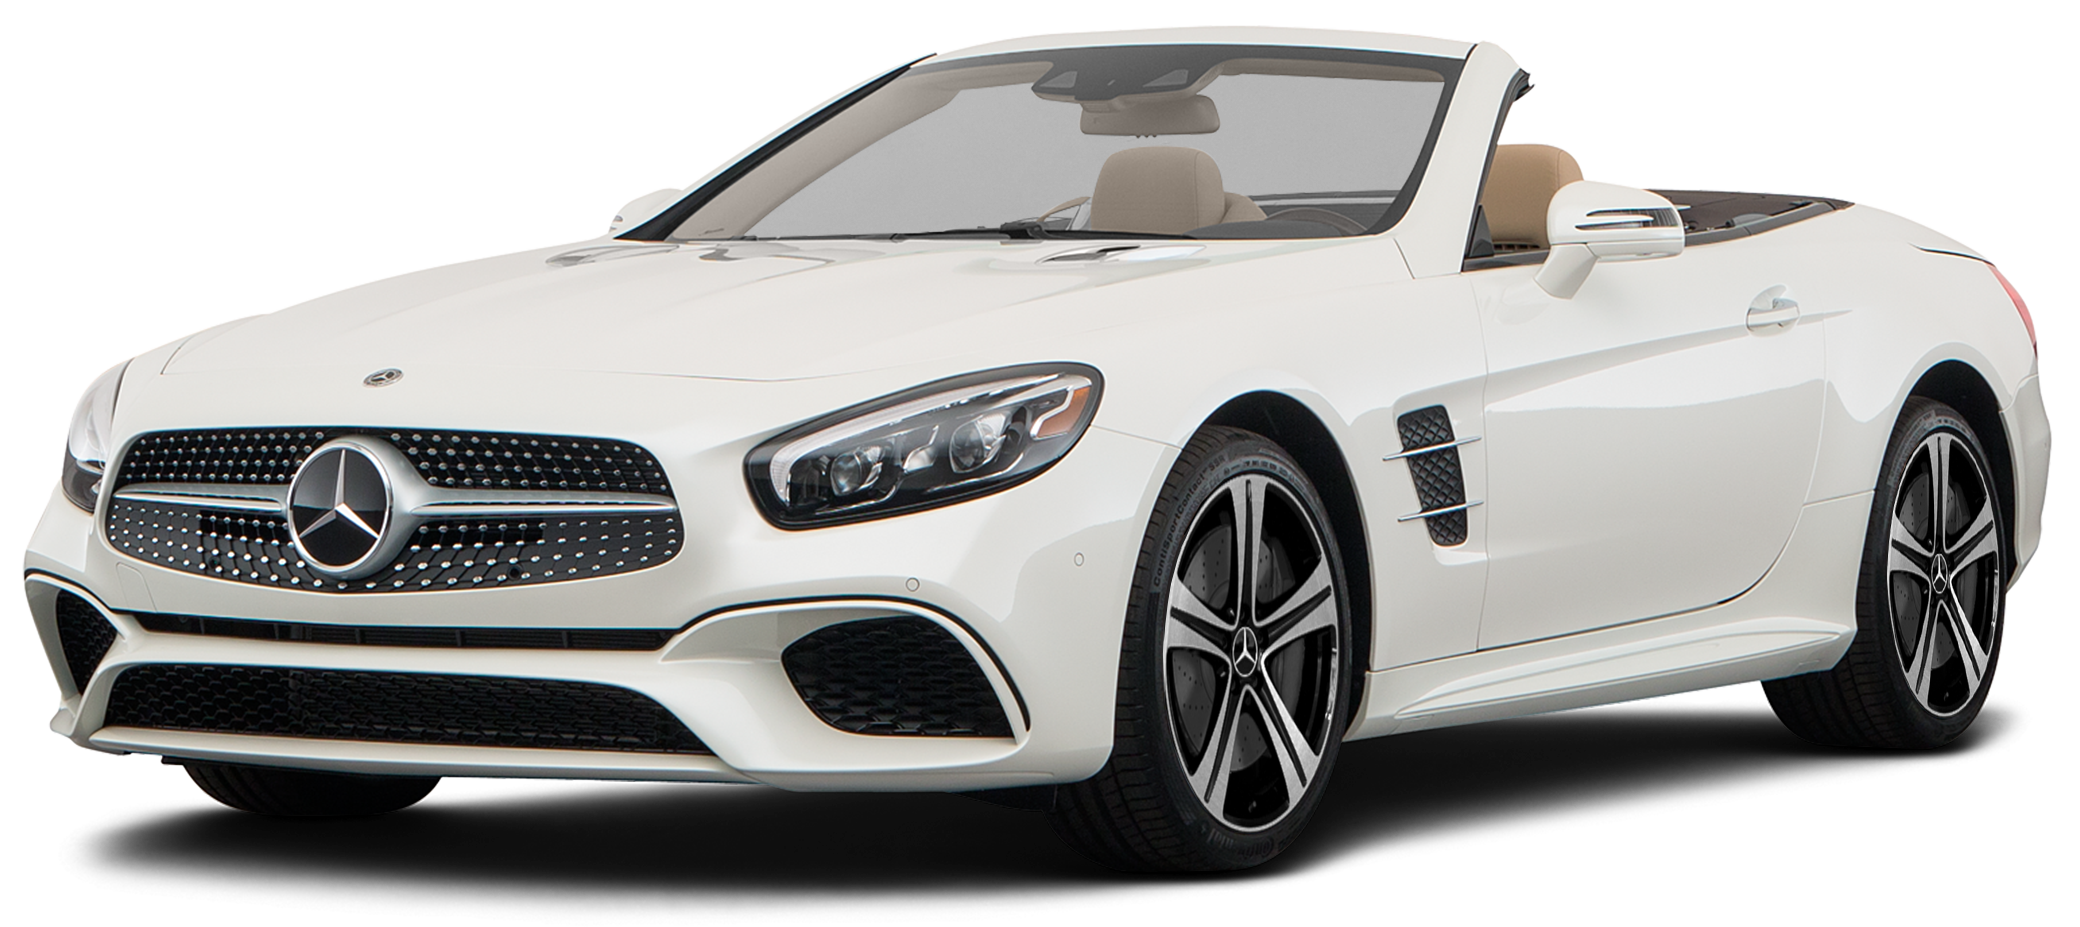 2019 Mercedes-Benz SL 450 Incentives, Specials & Offers in Owings Mills MD